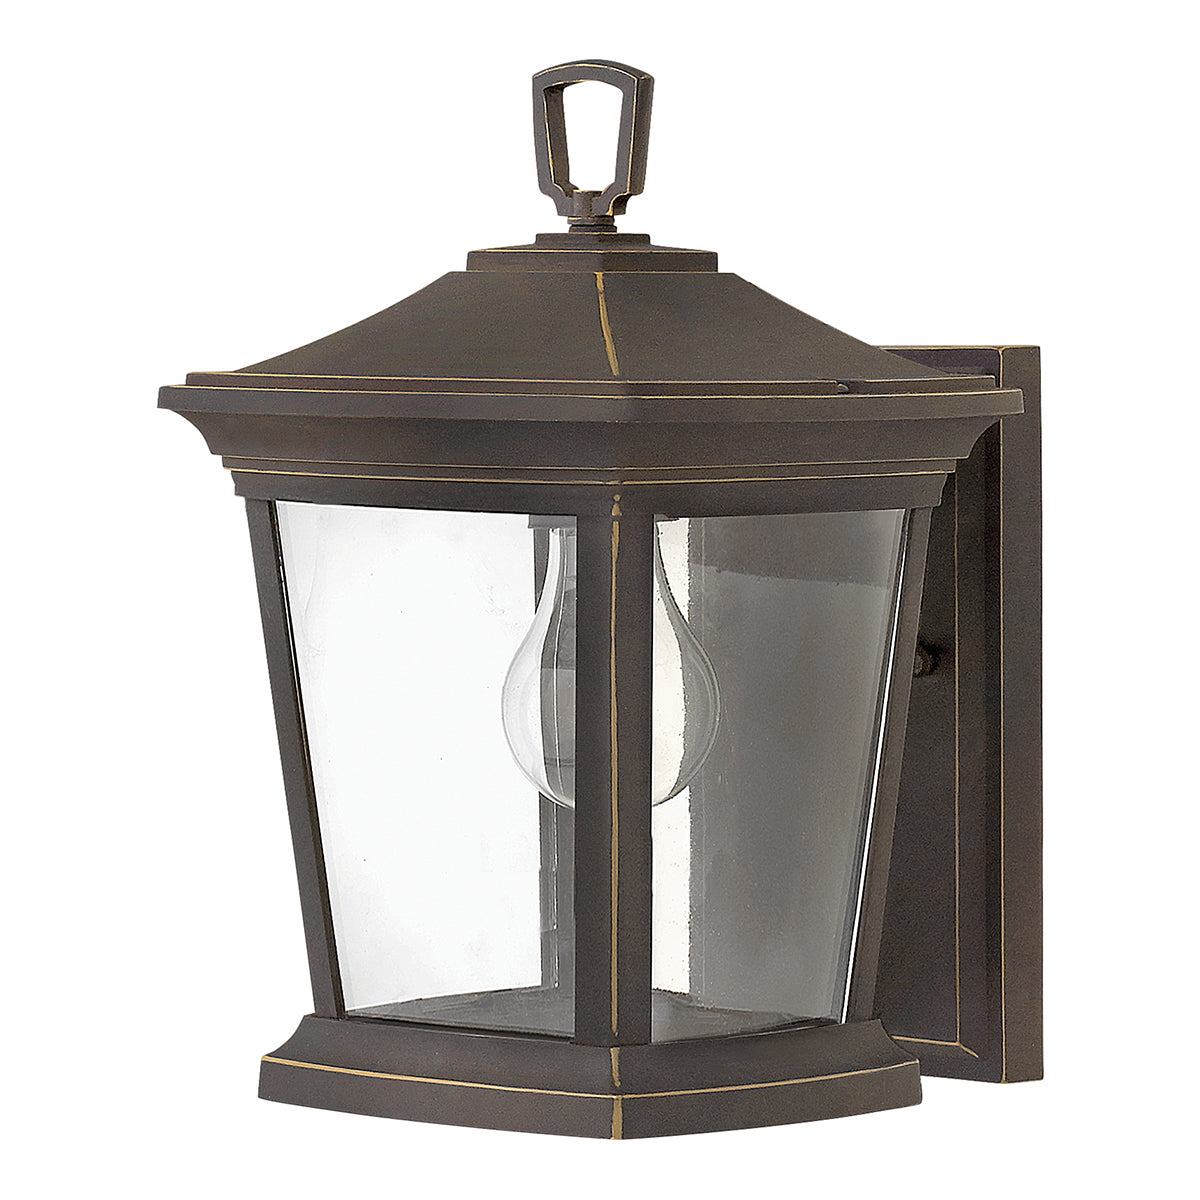 Bromley Small Wall Lantern - Oil Rubbed Bronze Finish